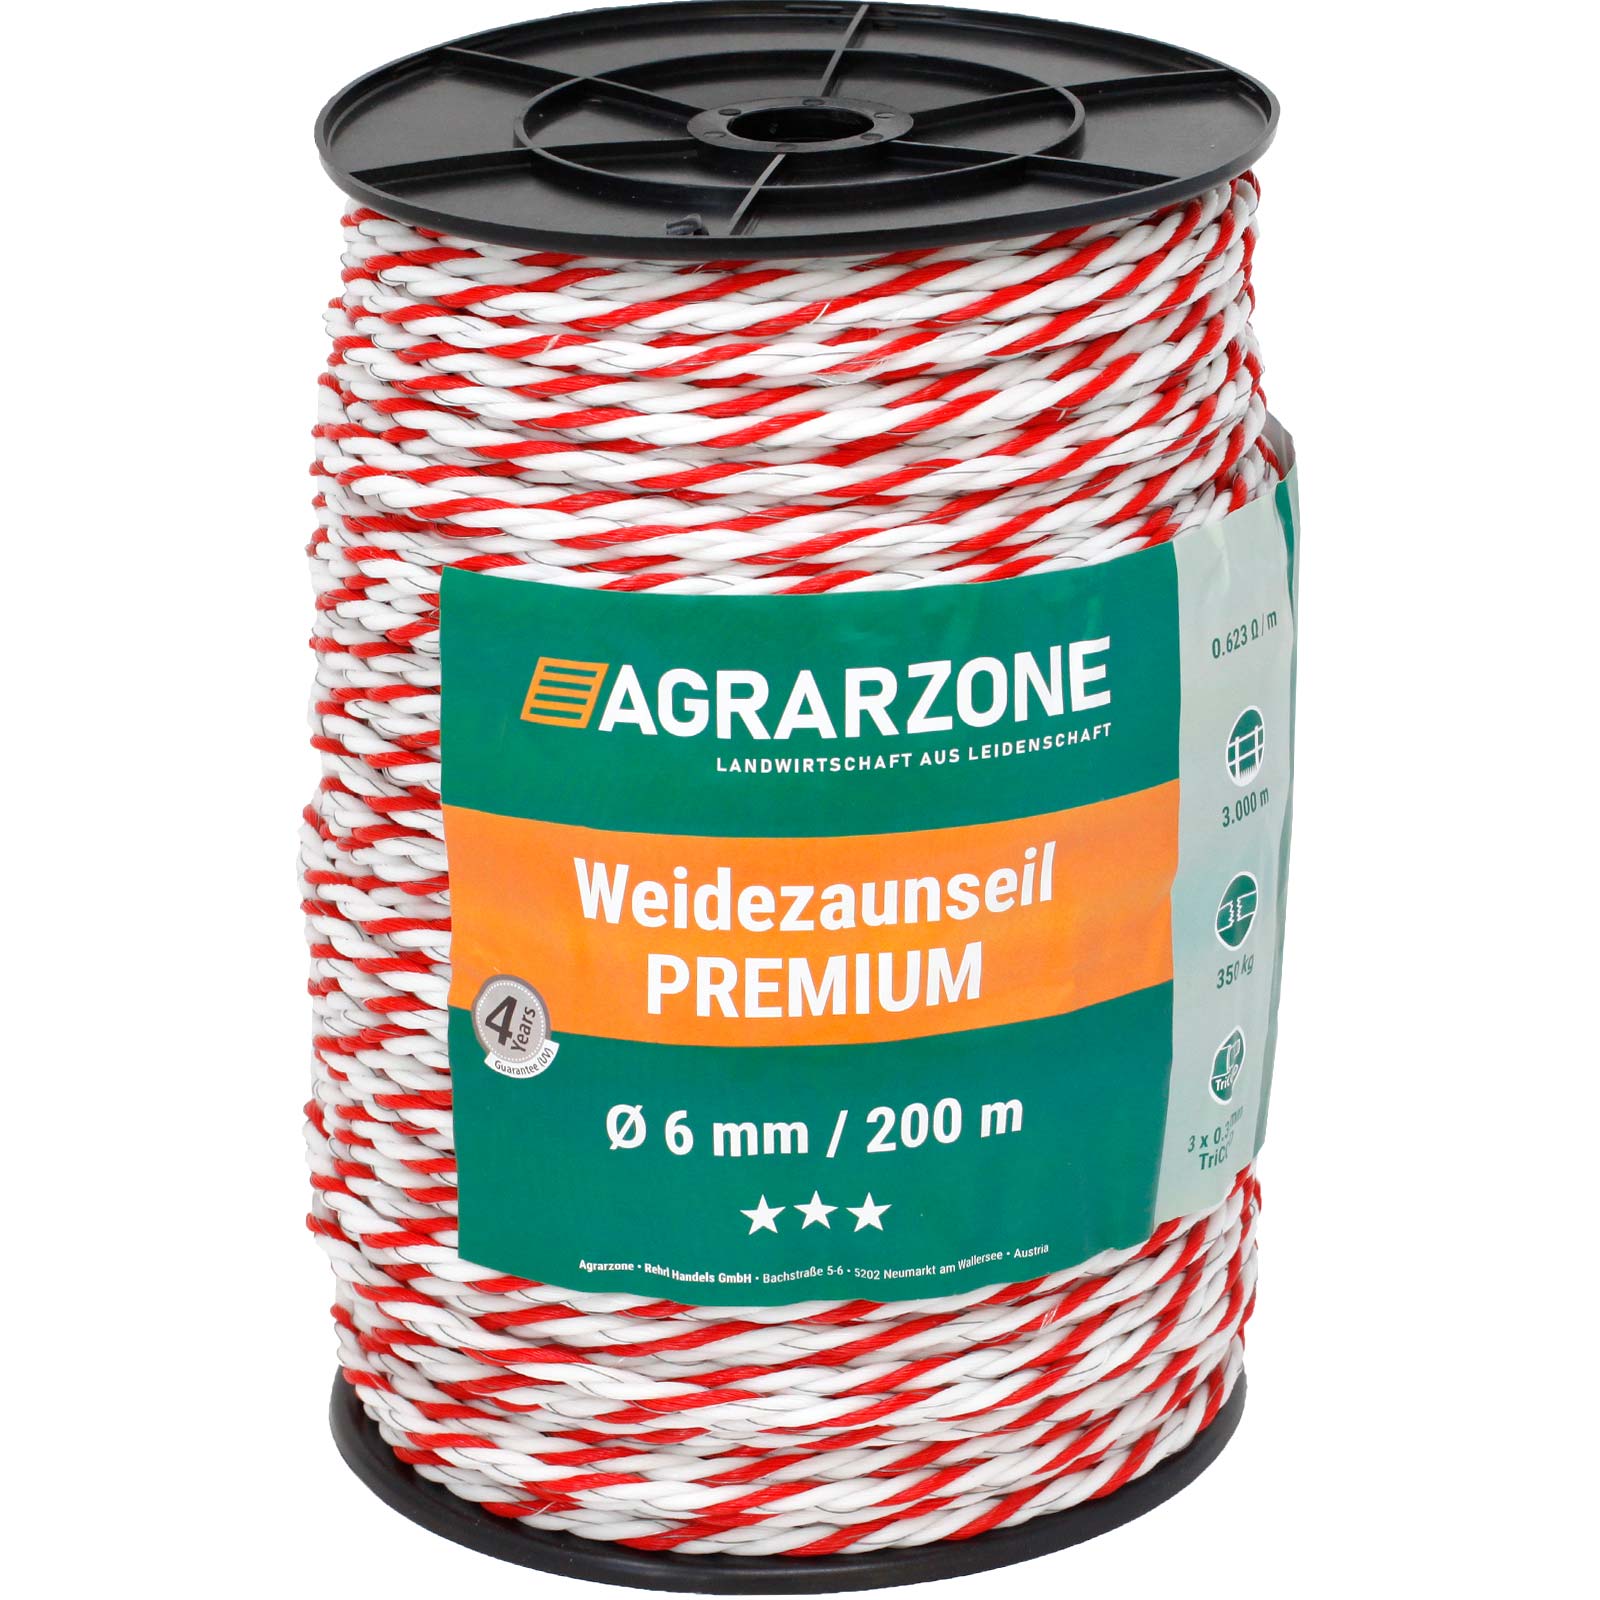 Agrarzone Pasture Fence Rope Premium Ø 6mm, 0.30 TriCOND, white-red 200 m x 6 mm